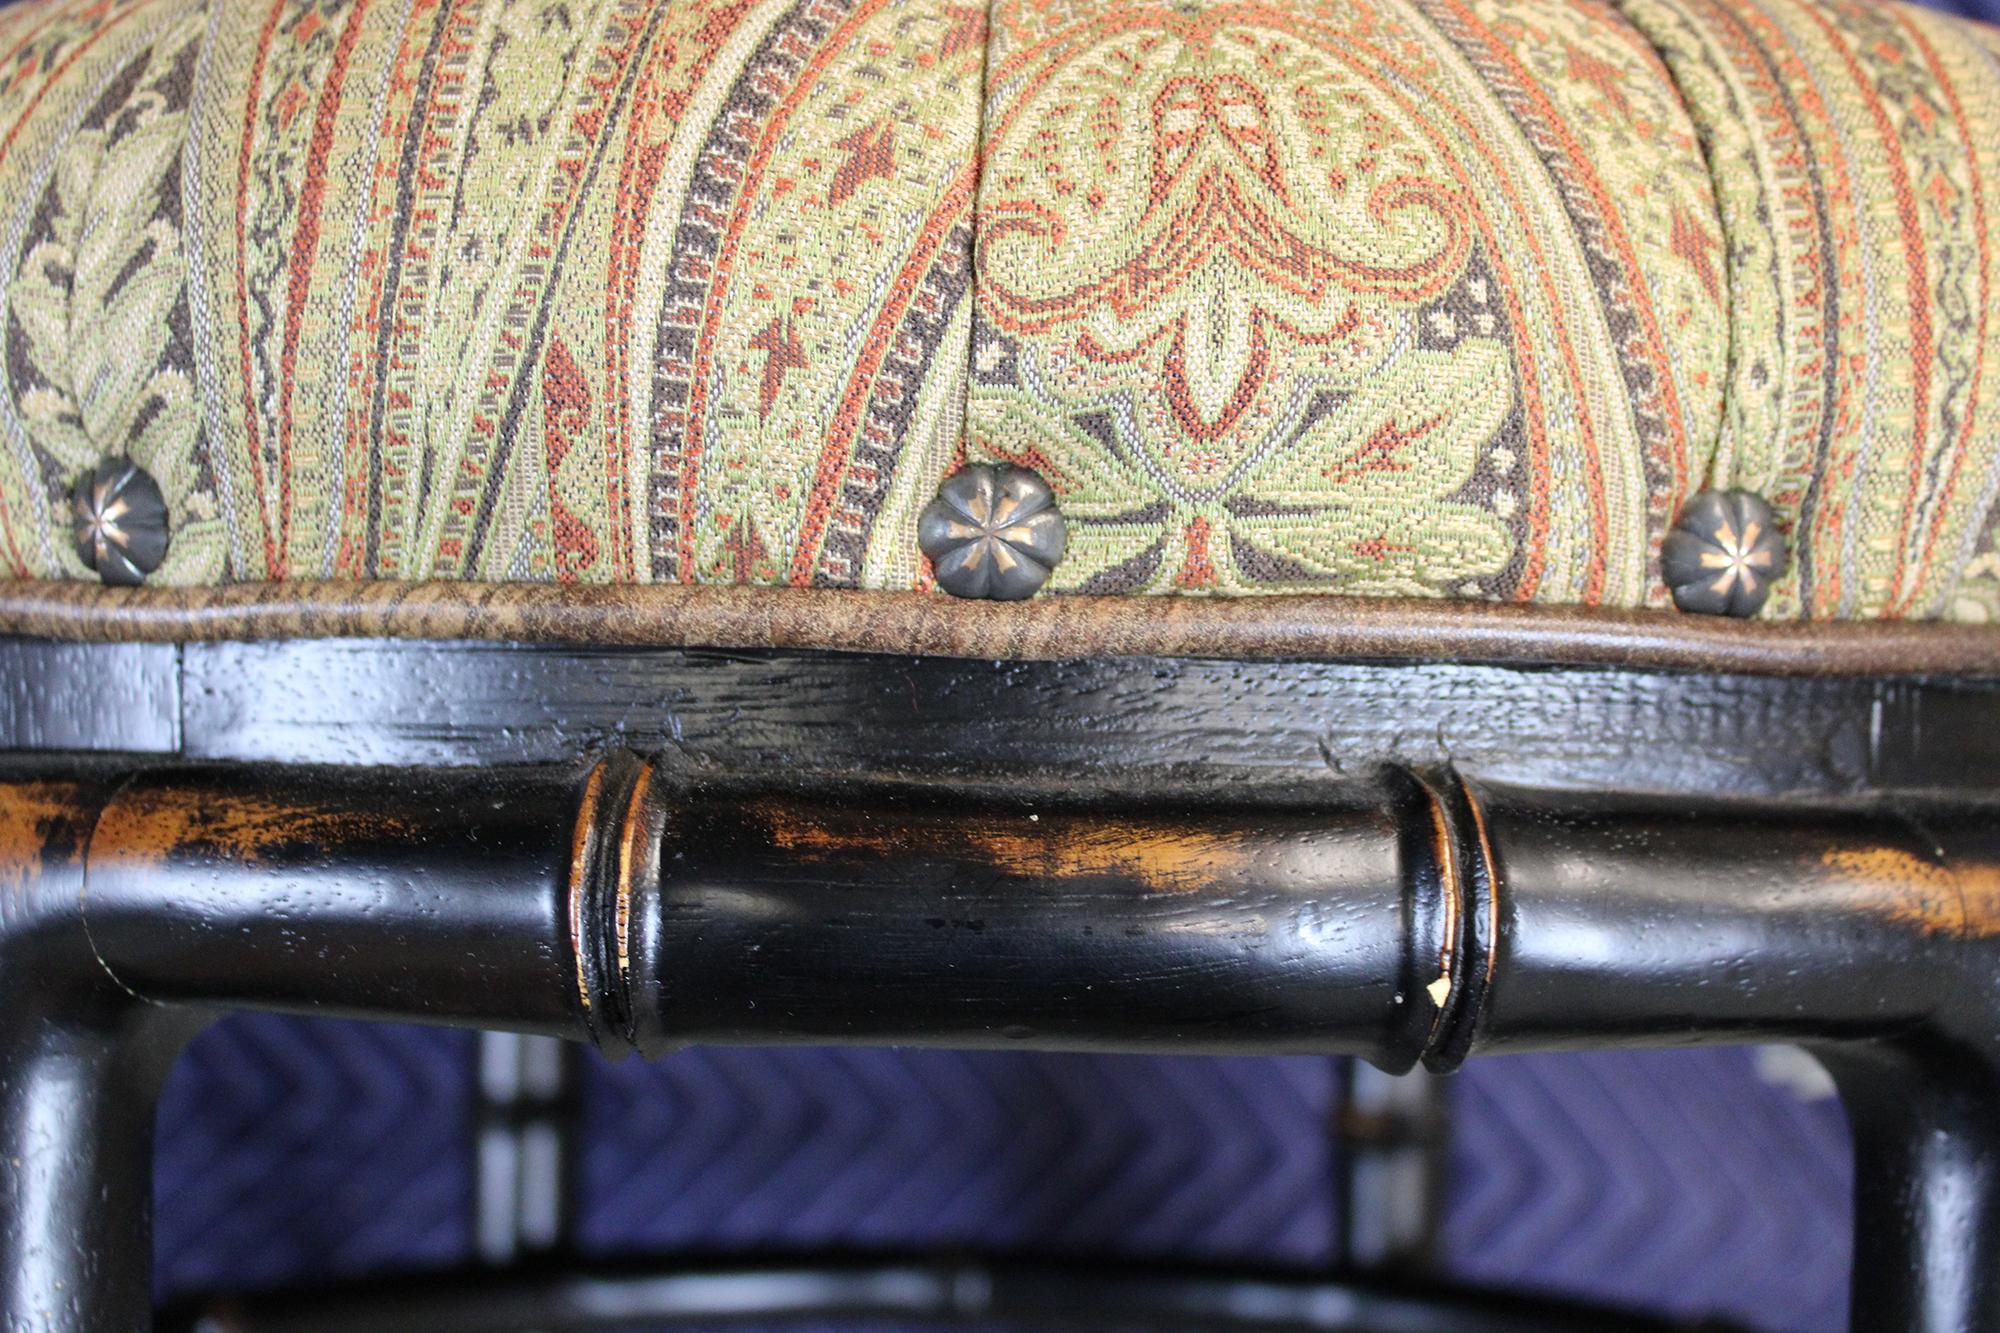 Vanguard Furniture Round Leather and Paisley Faux Bamboo Ottoman Bench Pouf In Good Condition For Sale In Dayton, OH